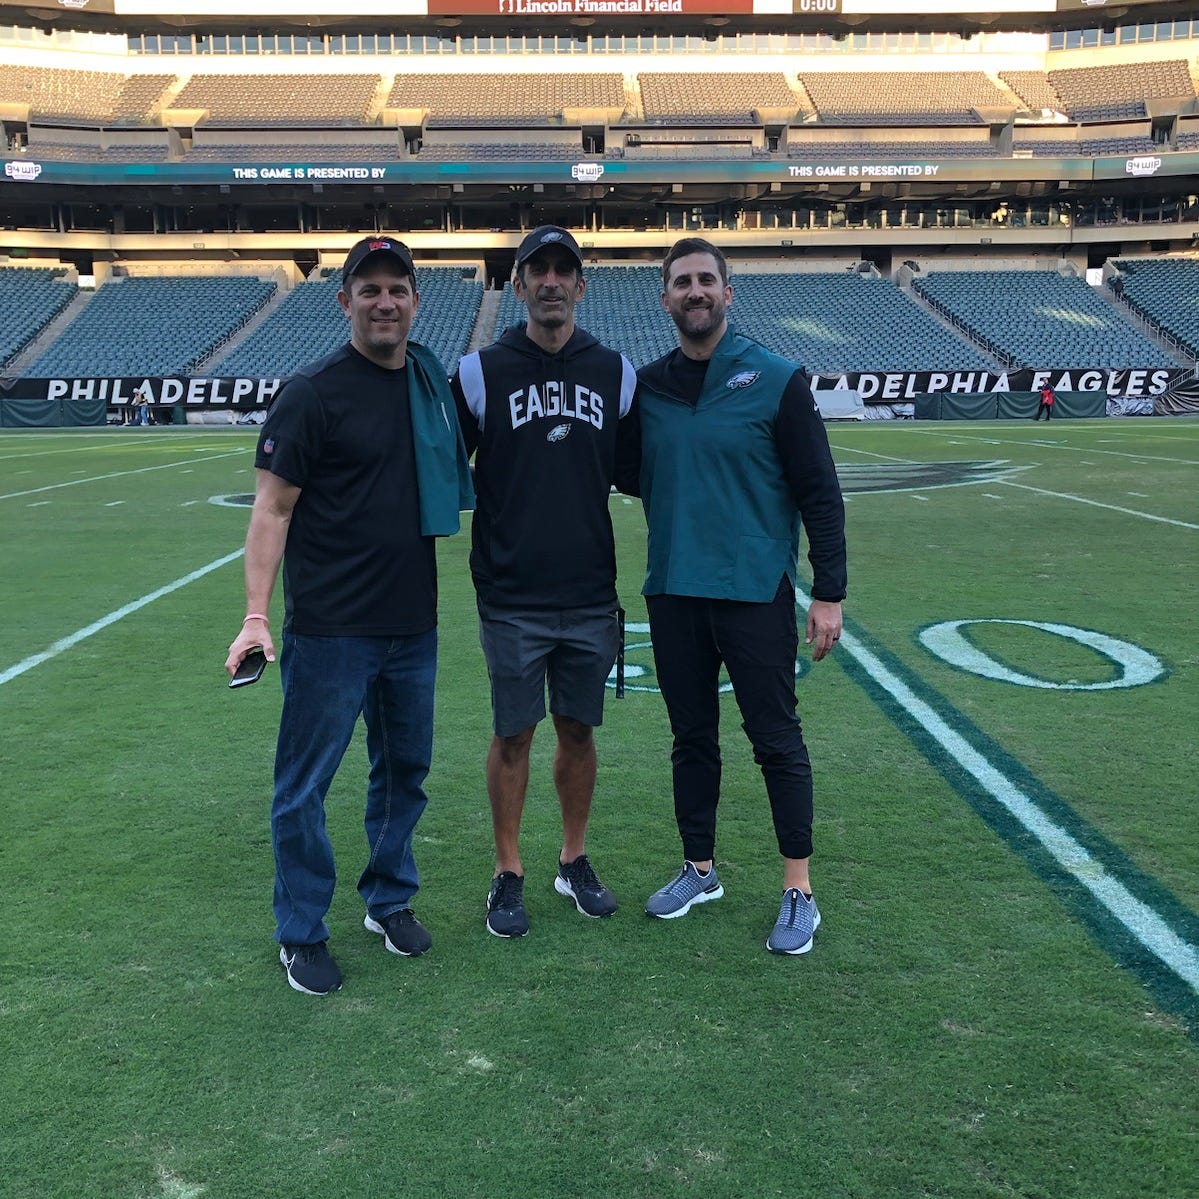 Brothers Mike Sirianni (left), Jay Sirianni (middle) and Nick Sirianni (right) pose for an undated photo at Lincoln Financial Field in Philadelphia.